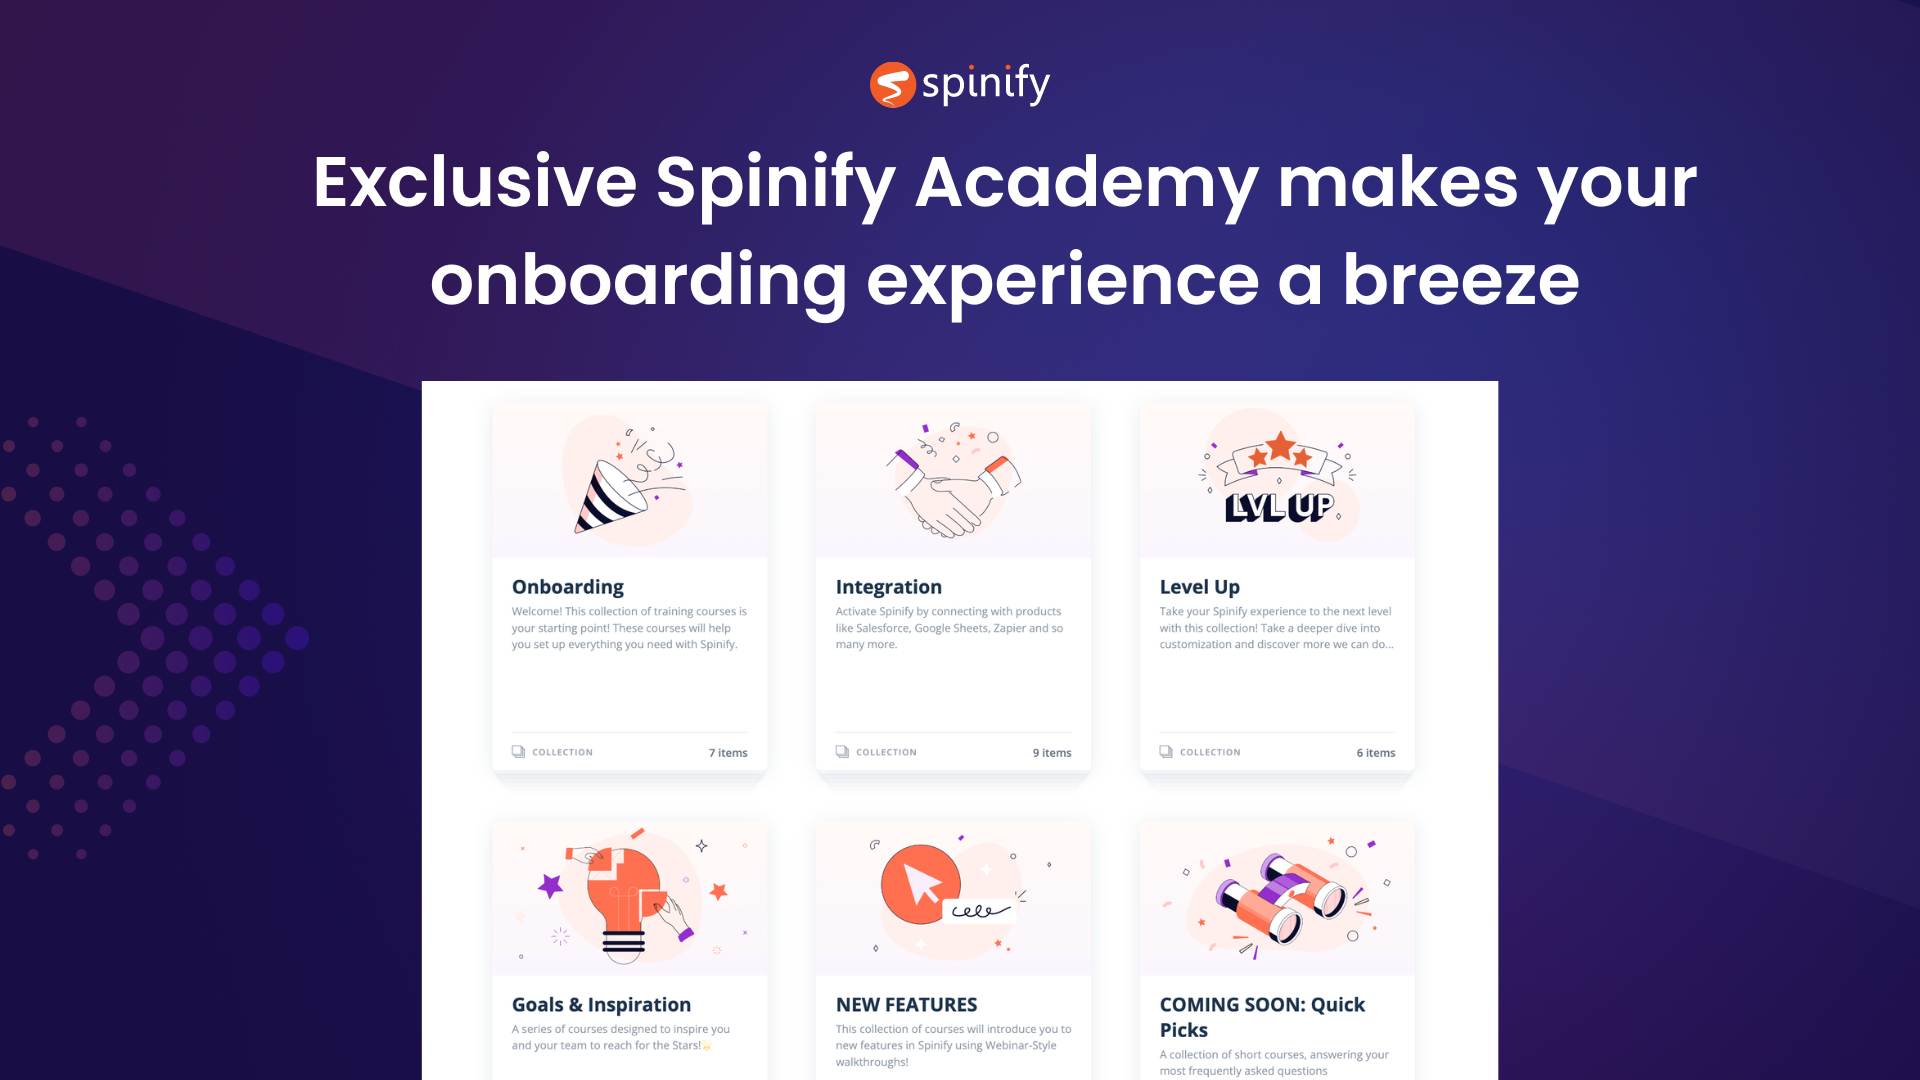 Exclusive Spinify Academy makes your onboarding experience a breeze